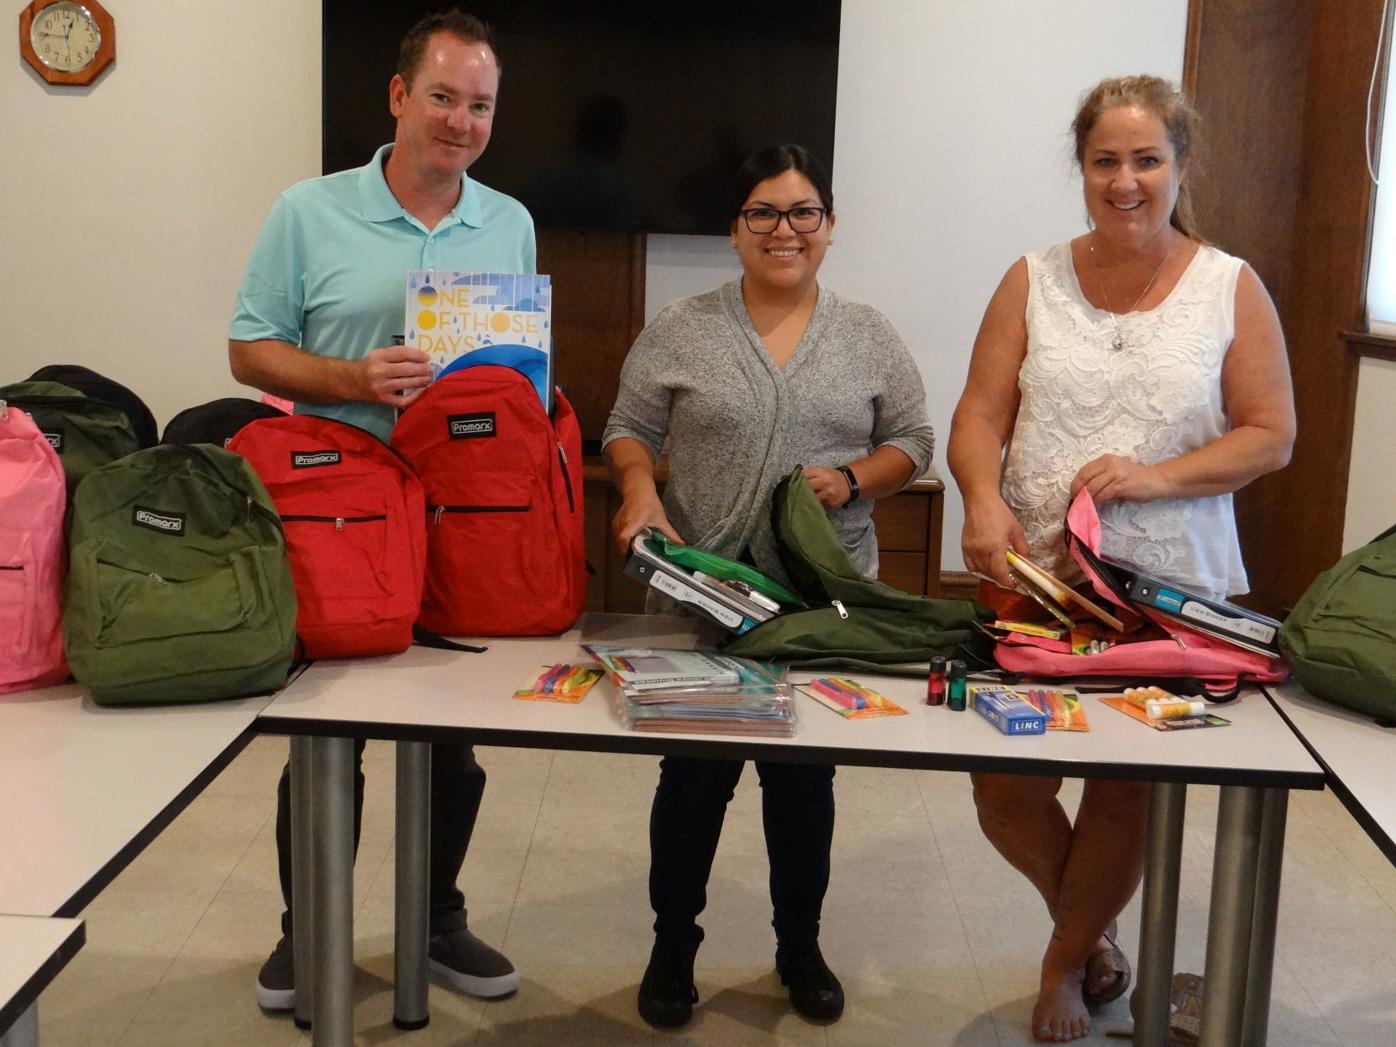 In it together': Back to school program provides for Valley kids, Lifestyles